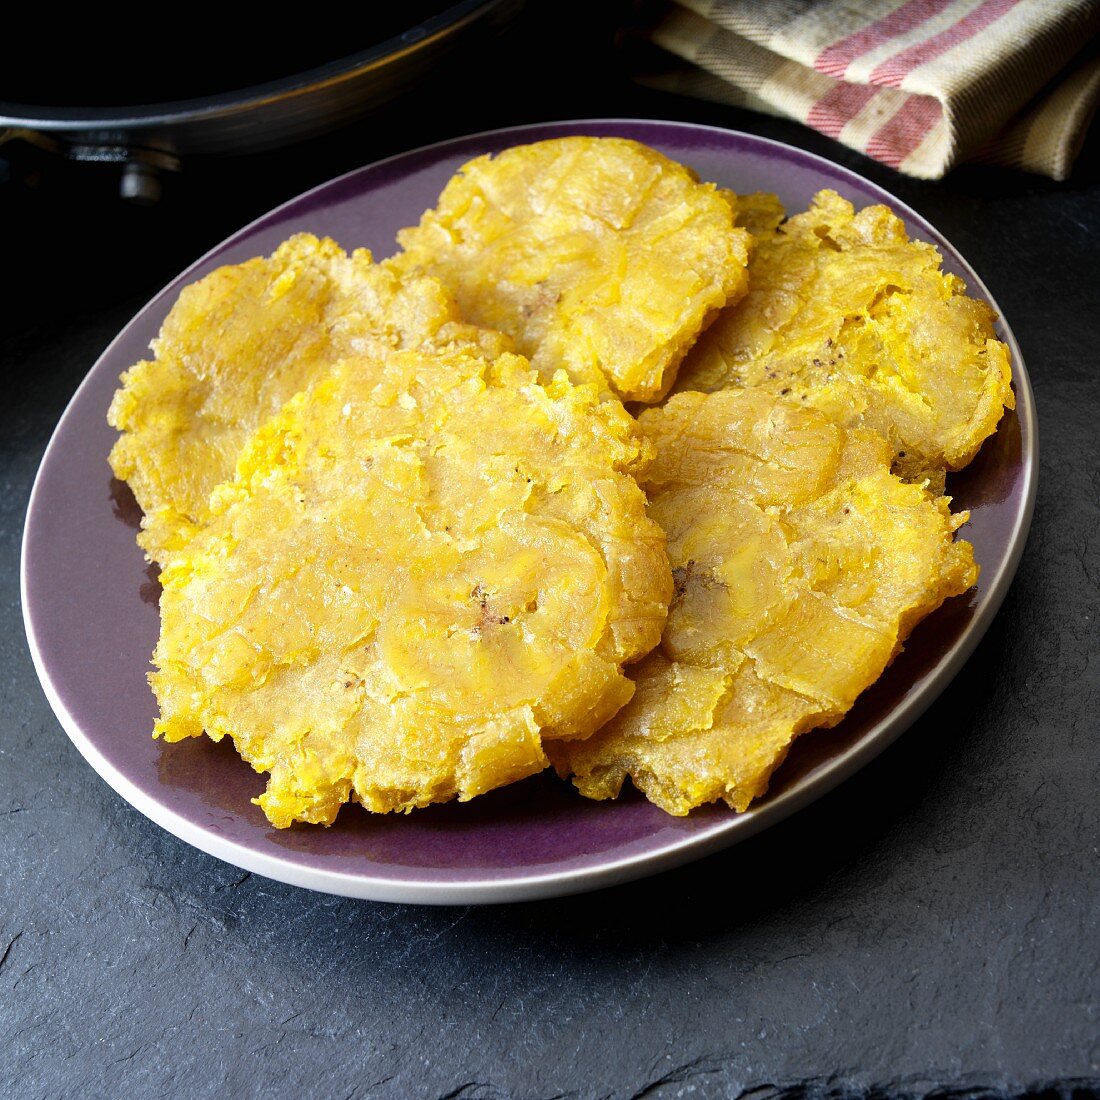 Tostones, twice fried plantains